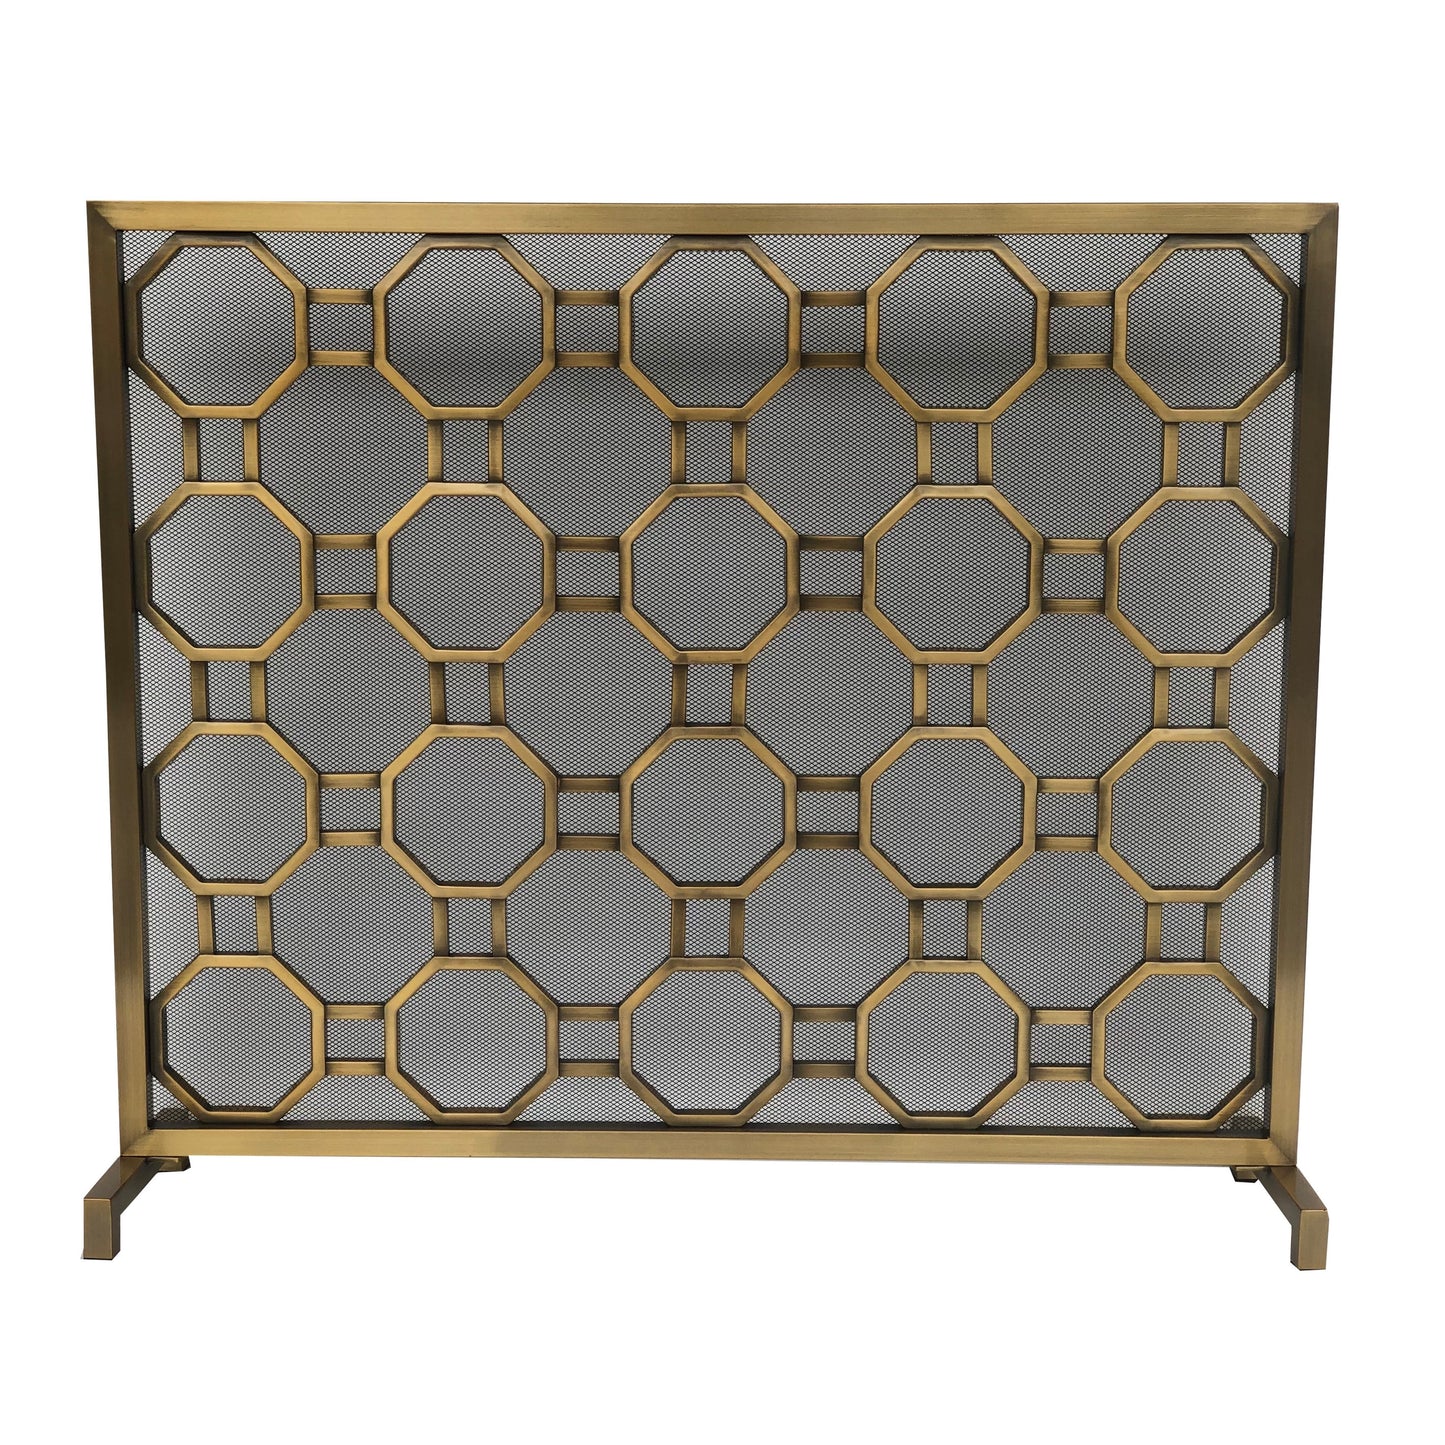 40" Steel Panel Screen with Circle Pattern Design